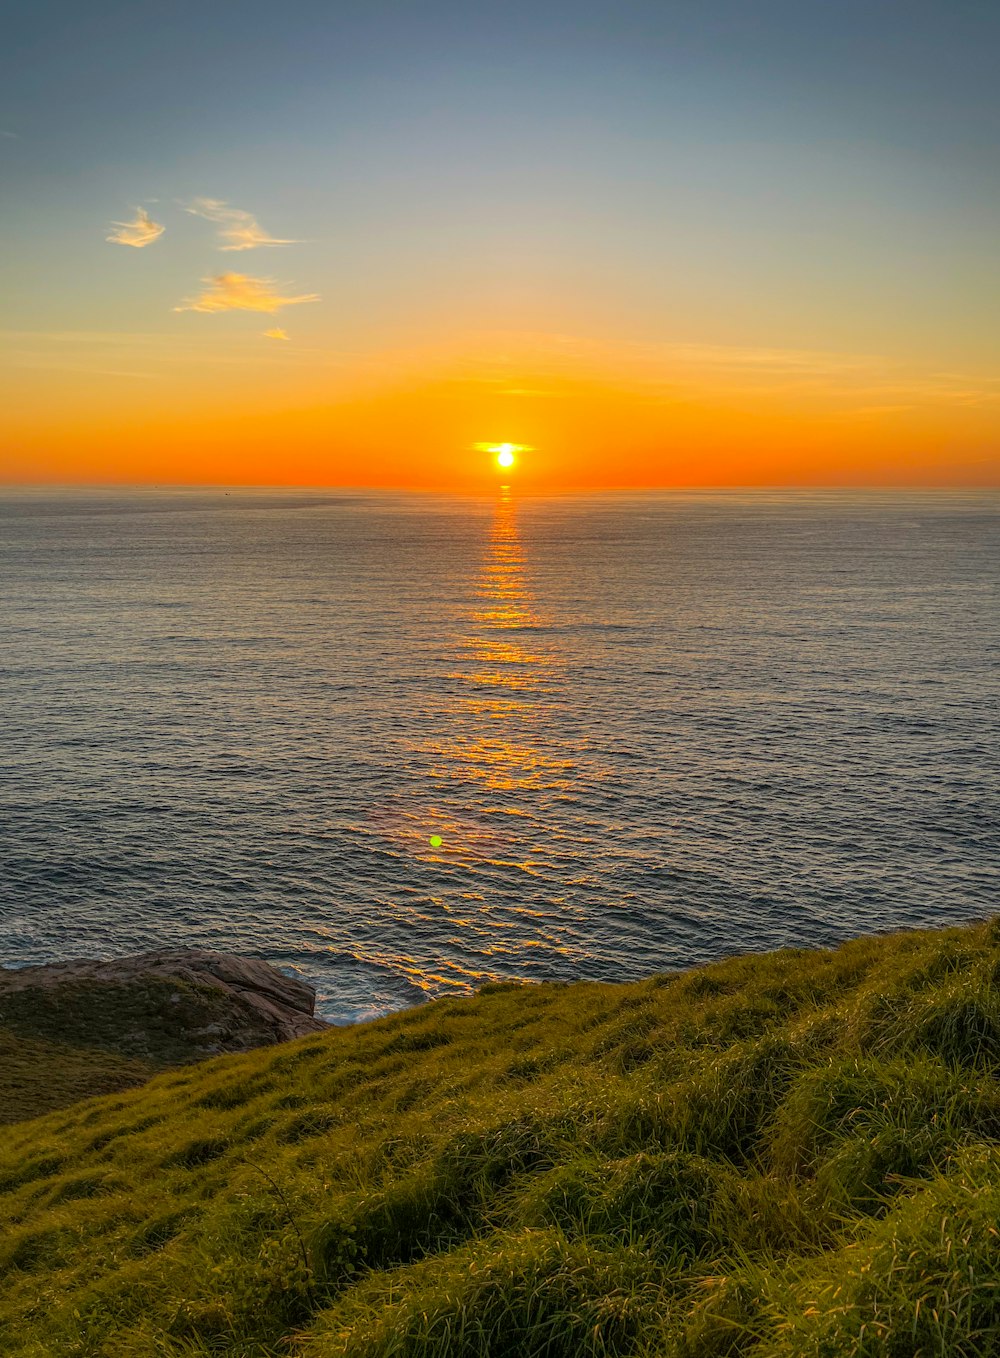 the sun is setting over the ocean on a grassy hill